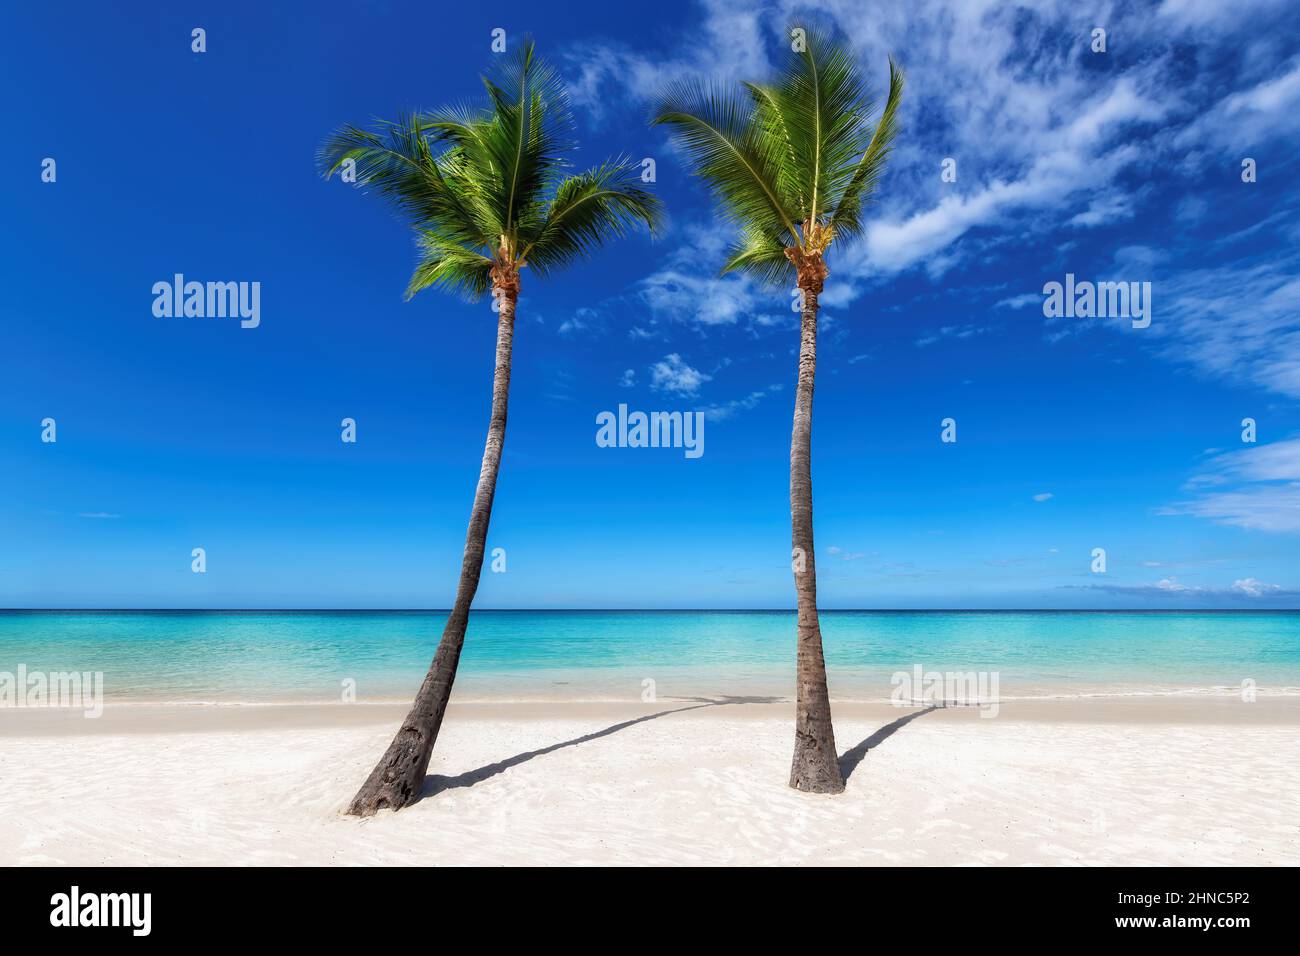 Coco palms in sunny beach and blue sky Stock Photo